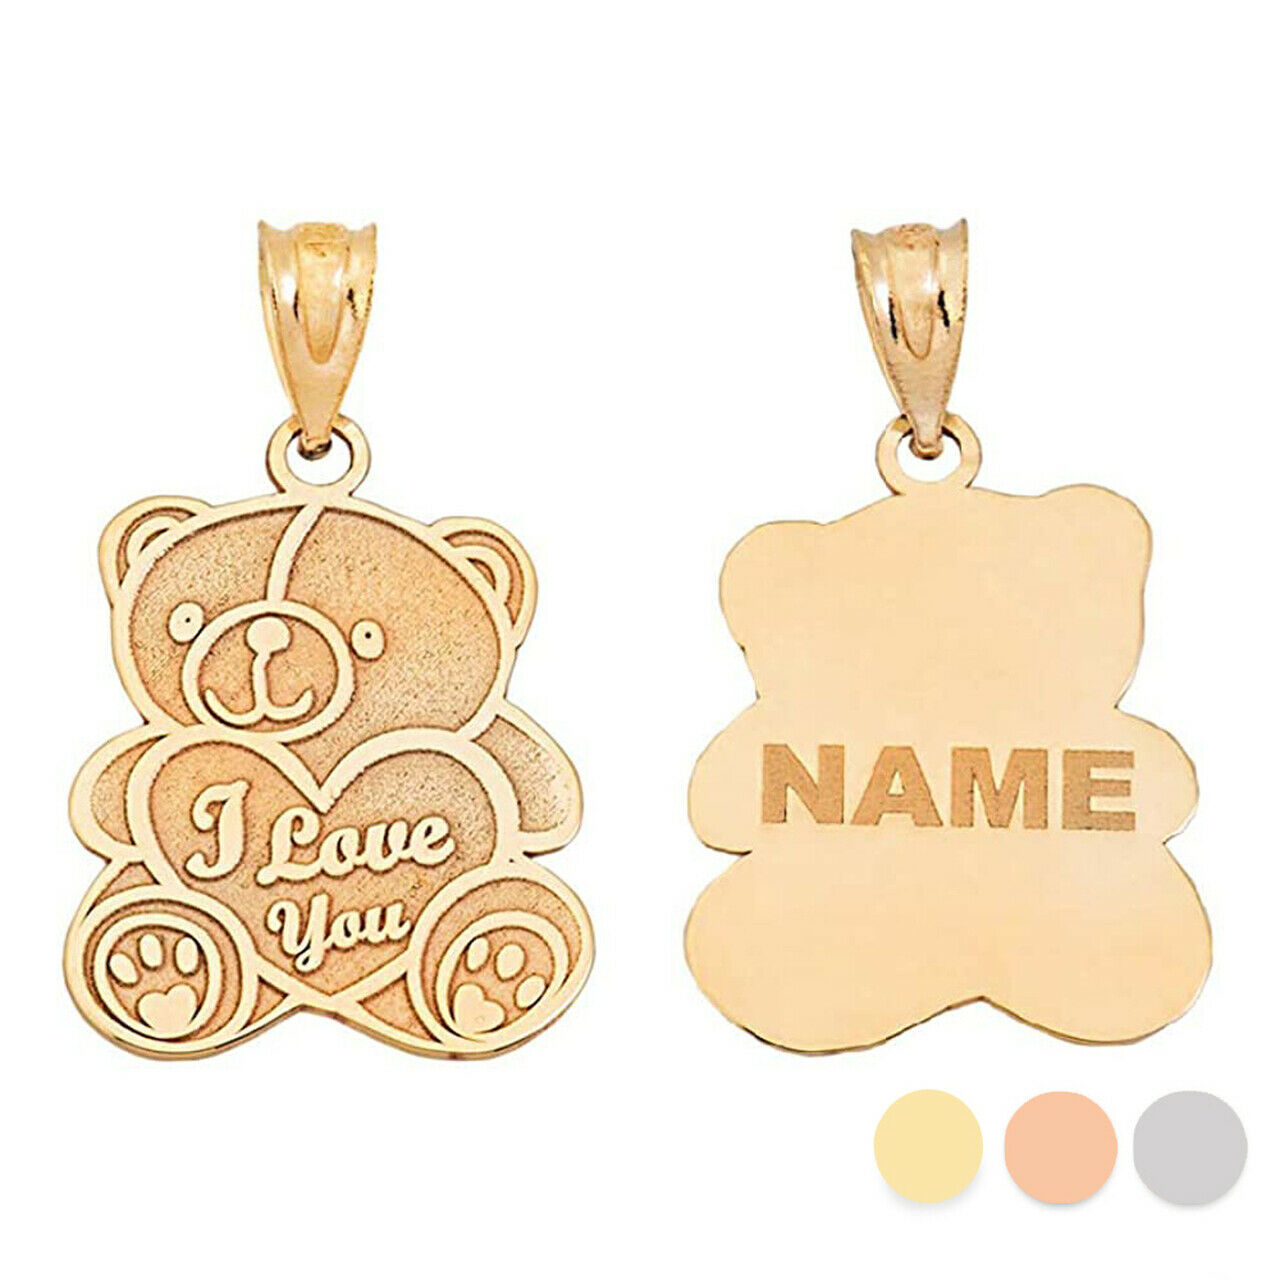 Personalized Name 10k 14k Gold I Love You Heart Teddy Bear Pendant Necklace